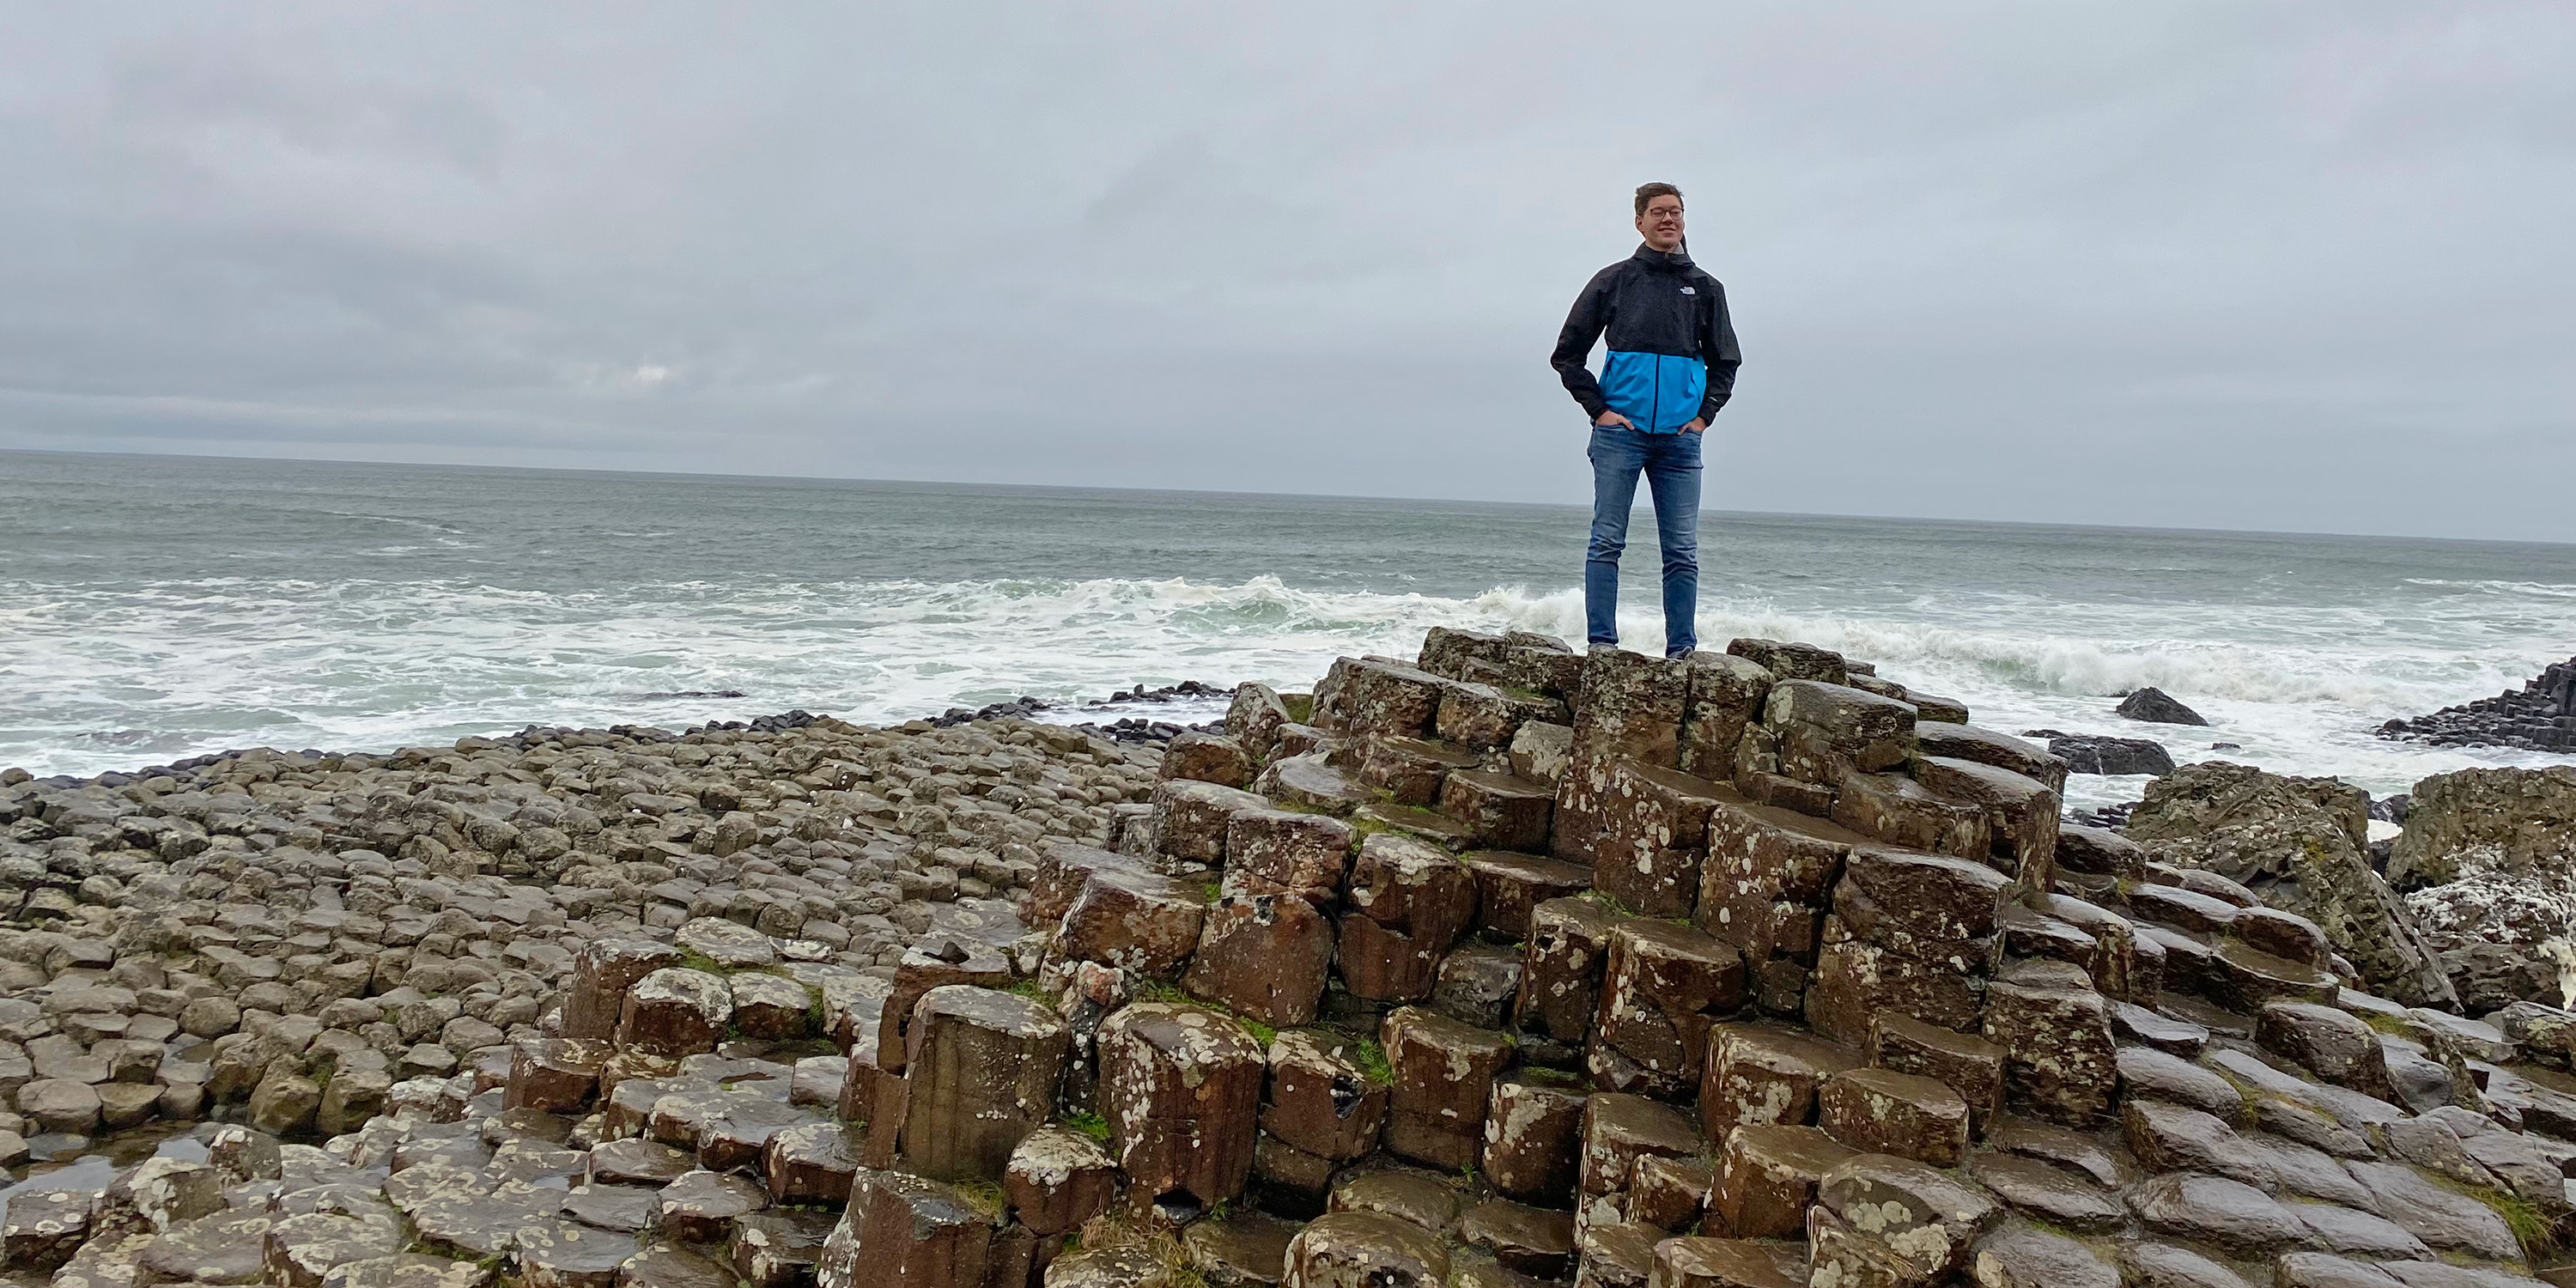 Join Jonas on part 4 of his semester abroad in Ireland.